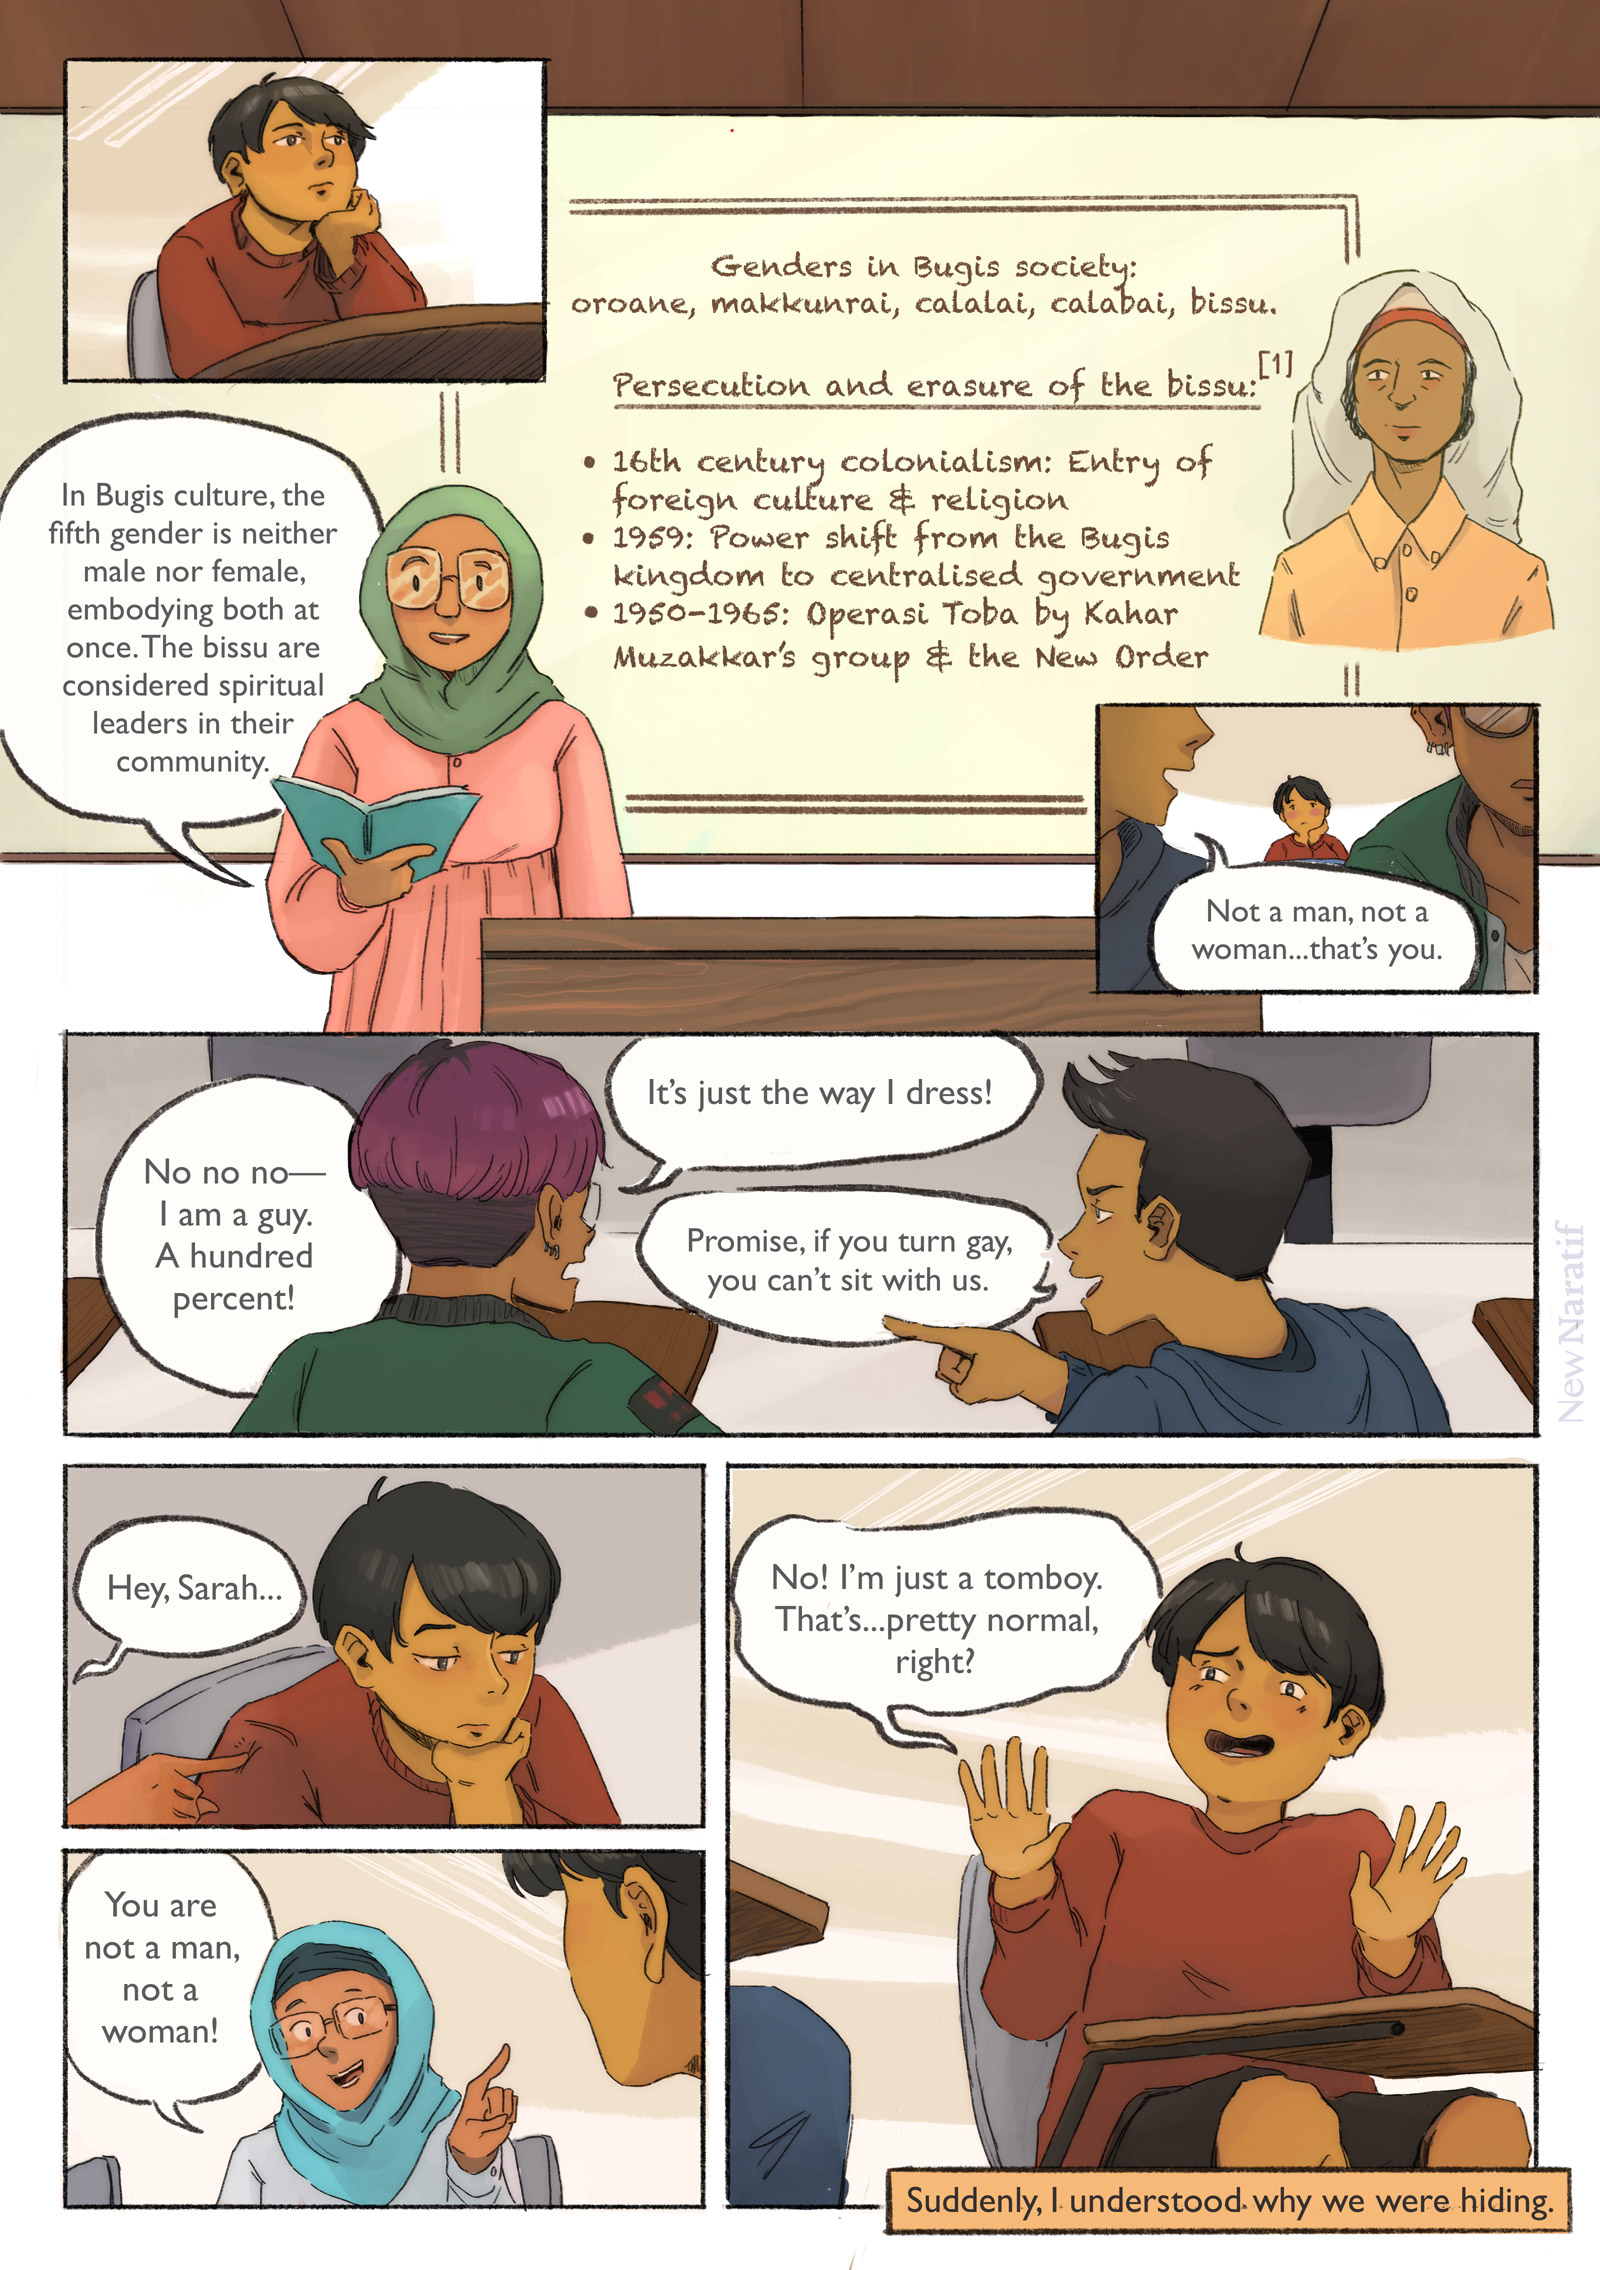 Page 3.
A comic page of 7 panels in black lines and full colour. The narration is provided in caption boxes.
Panel 1. The main character leans forward on his desk in a classroom.
Panel 2. A lecturer who wears a green hijab and pink blouse is standing in front of a whiteboard with a drawing of a bissu person. They say: In Bugis culture, the fifth gender is neither male nor female, embodying both at once. The bissu are considered spiritual leaders in their community. On the whiteboard are the notes: Genders in Bugis society: oroane, makkunrai, calalai, calabai, bissu. Persecution and erasure of the bissu:
- 16th century colonialism: entry of foreign culture & religion
- 1959: power shift from the Bugis kingdom to centralised government
- 1950-1965: Operasi Toba by Kahar Muzakkar’s group & the New Order
Panel 3. Two students are sitting in front of the main character. One of them whispers to the other: Not a man, not a woman...that’s you.
Panel 4. The one who spoke is masculine-presenting, wearing a blue hoodie. His friend, a feminine guy with buzz-cut hair, red nail polish and lots of earrings, is flustered and replies: No no no—I am a guy. A hundred percent! It’s just the way I dress! The student in the hoodie responds: Promise, if you turn gay, you can’t sit with us.
Panel 5. A girl beside the main character pokes his shoulder, saying: Hey, Sarah...
Panel 6. She points at him and giggles teasingly: you are not a man, not a woman!
Panel 7. The main character throws up his hands in panic, hurriedly replying: No! I’m just a tomboy. That’s...pretty normal, right? Narrator: Suddenly, I understood why we were hiding.